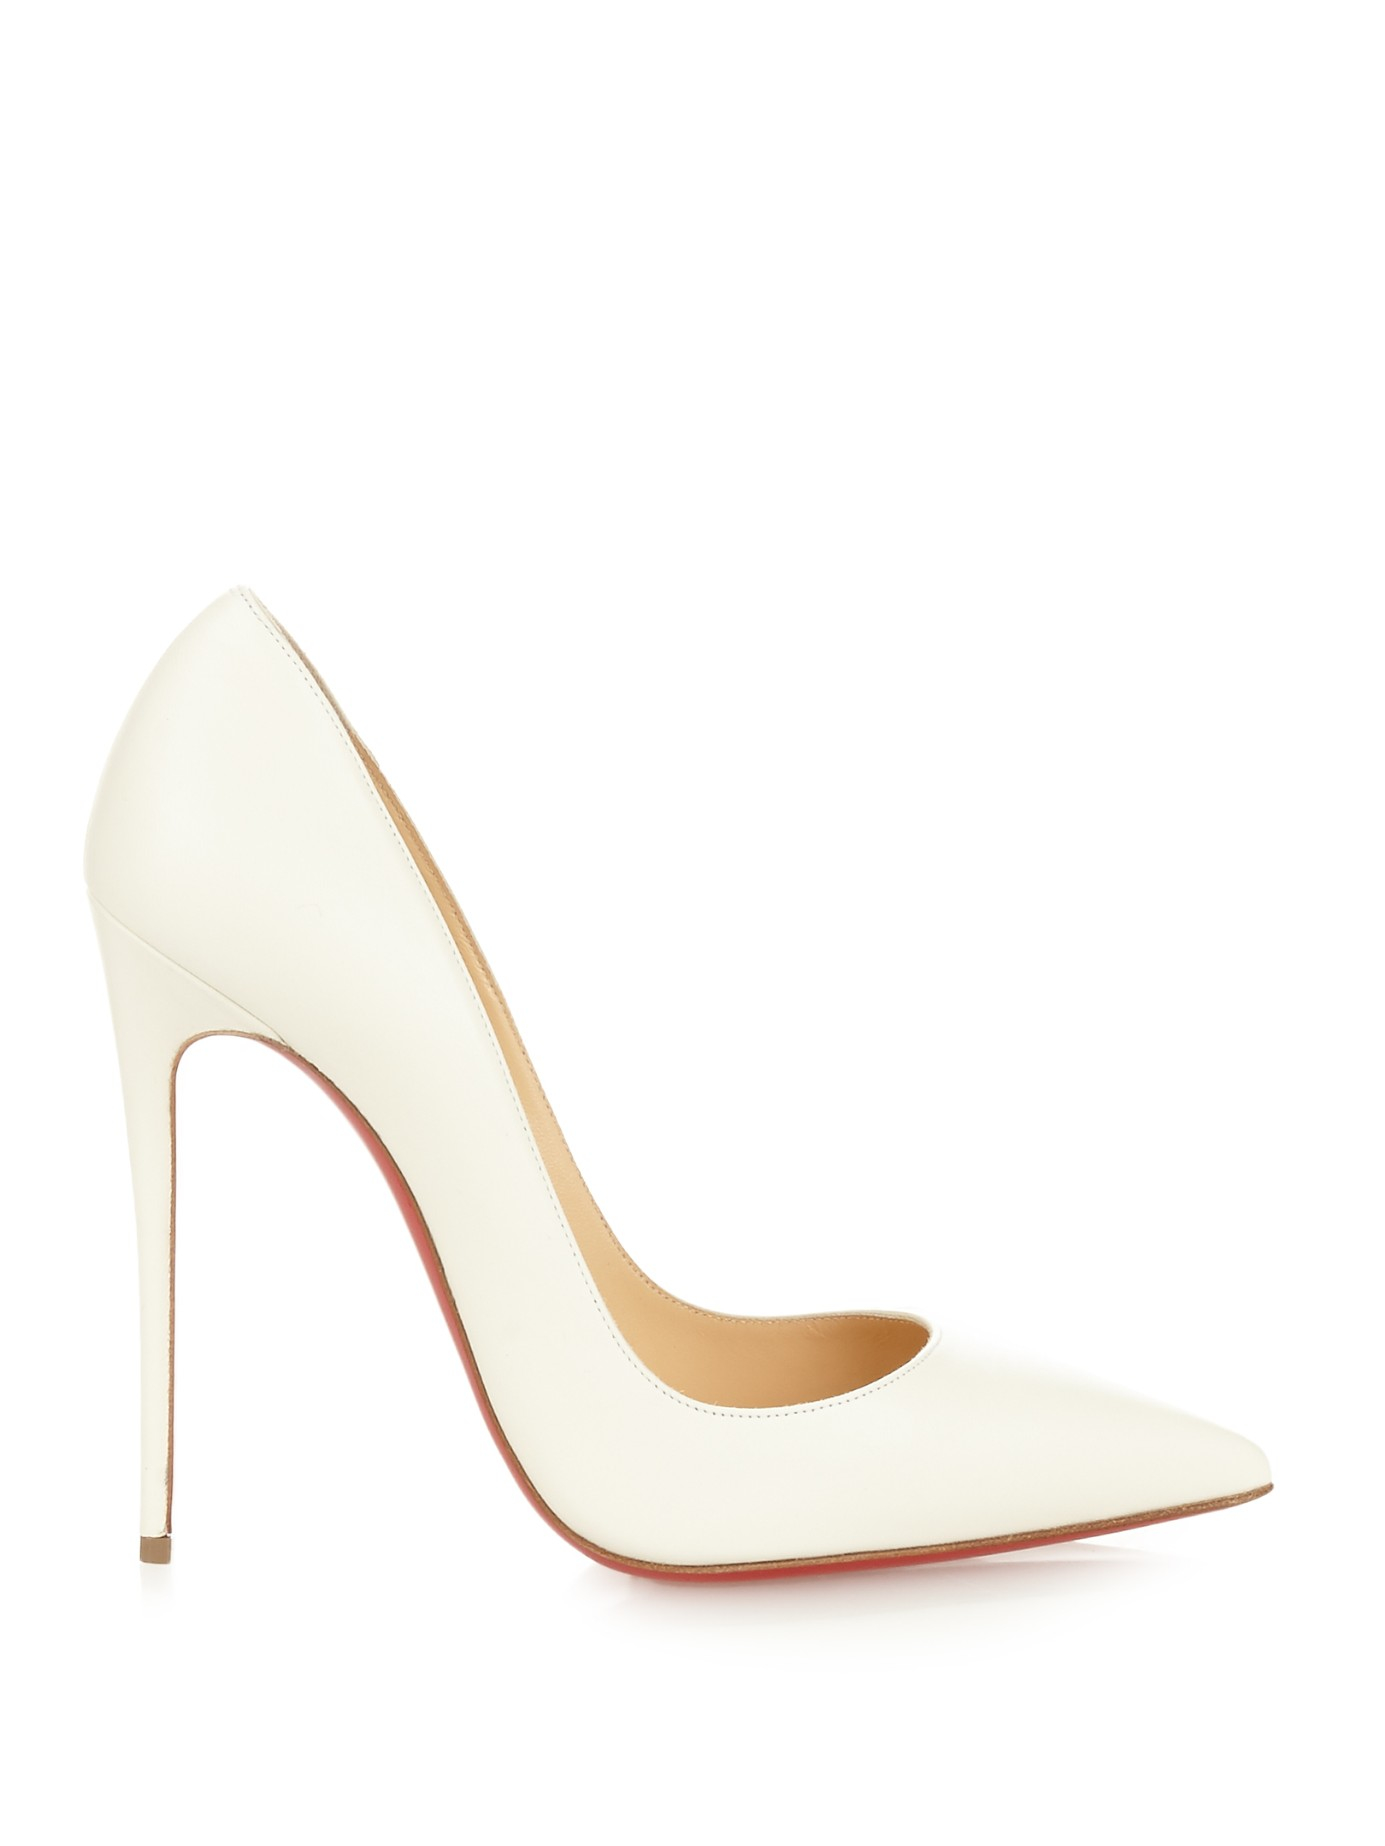 Christian louboutin So Kate Leather Pumps in White | Lyst  